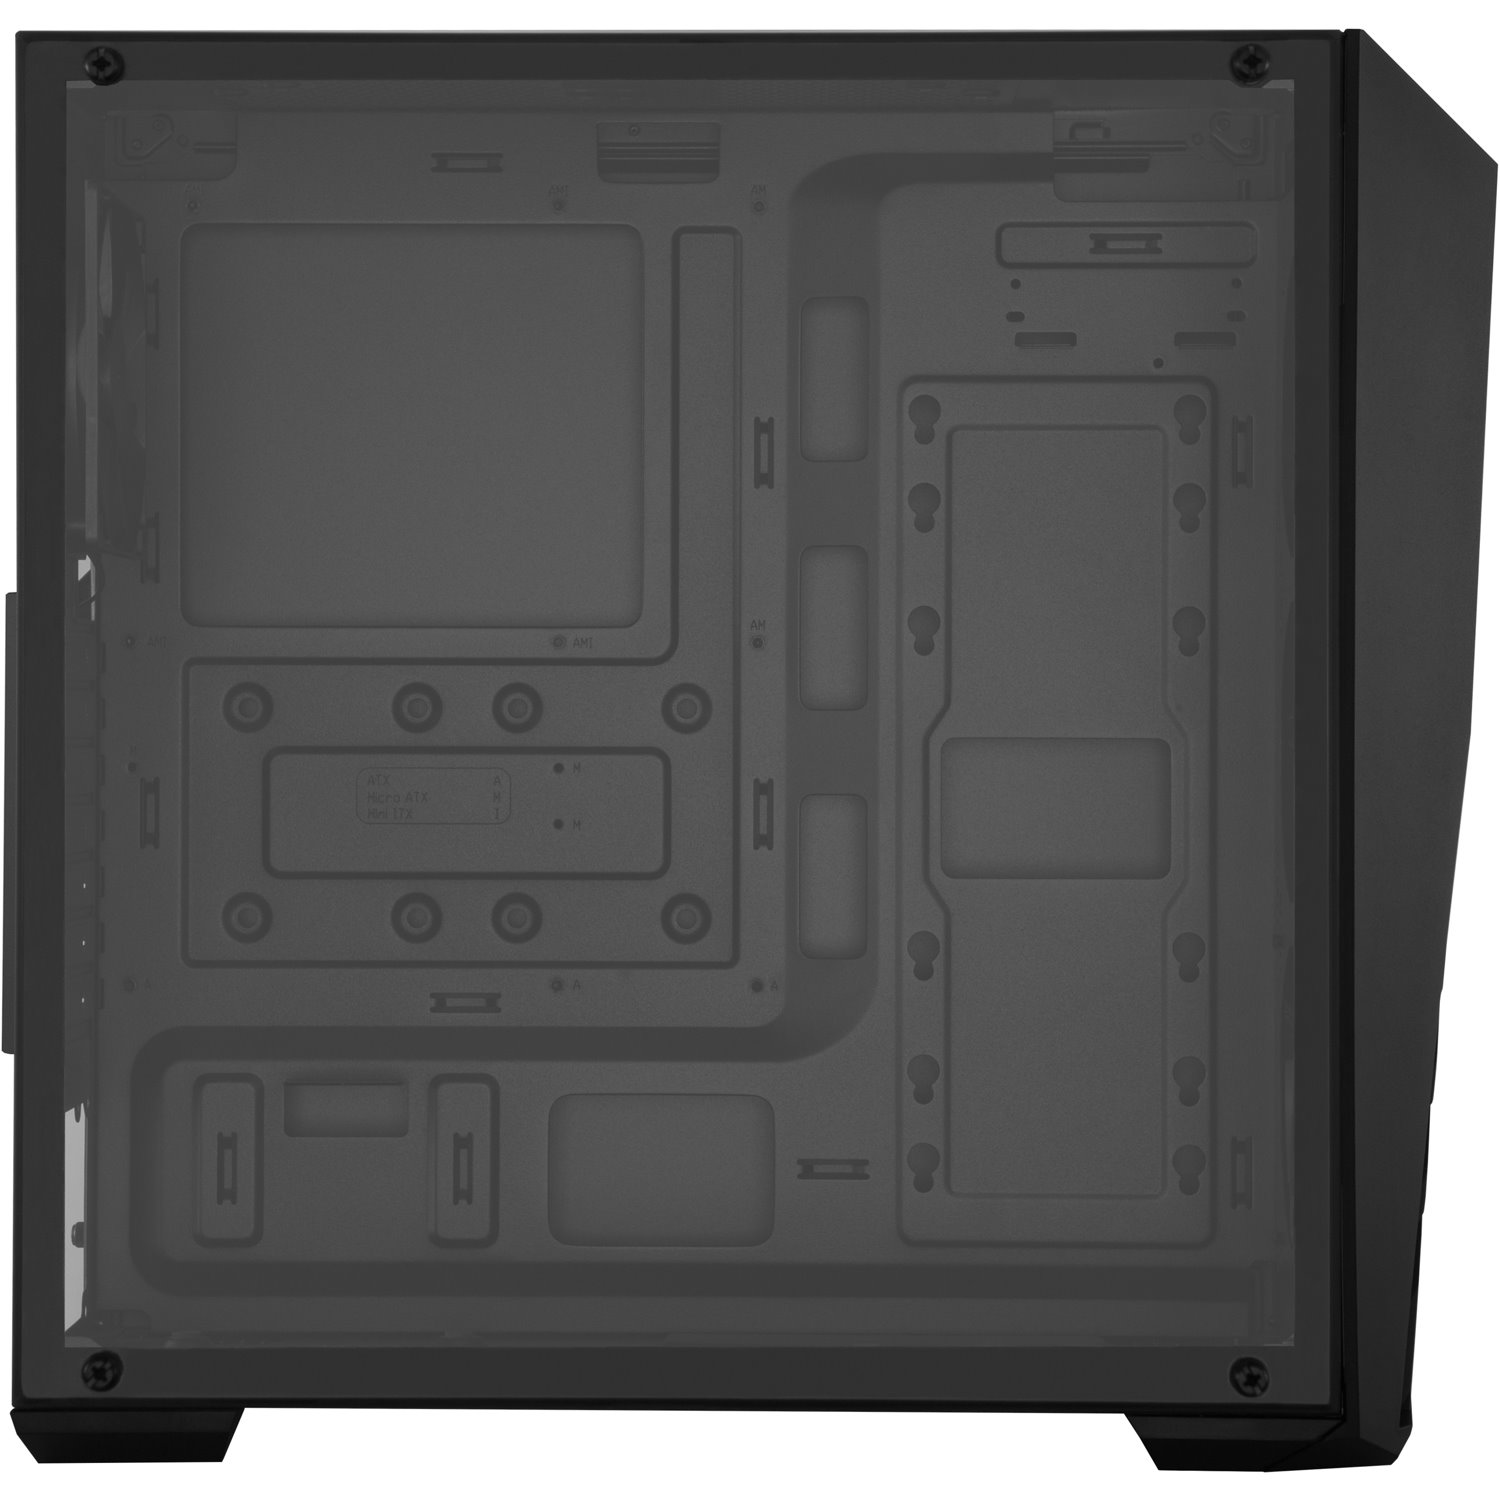 Cooler Master MasterBox MCB-K501L-KANN-S00 Gaming Computer Case - ATX Motherboard Supported - Mid-tower - Plastic, Acrylic - Black